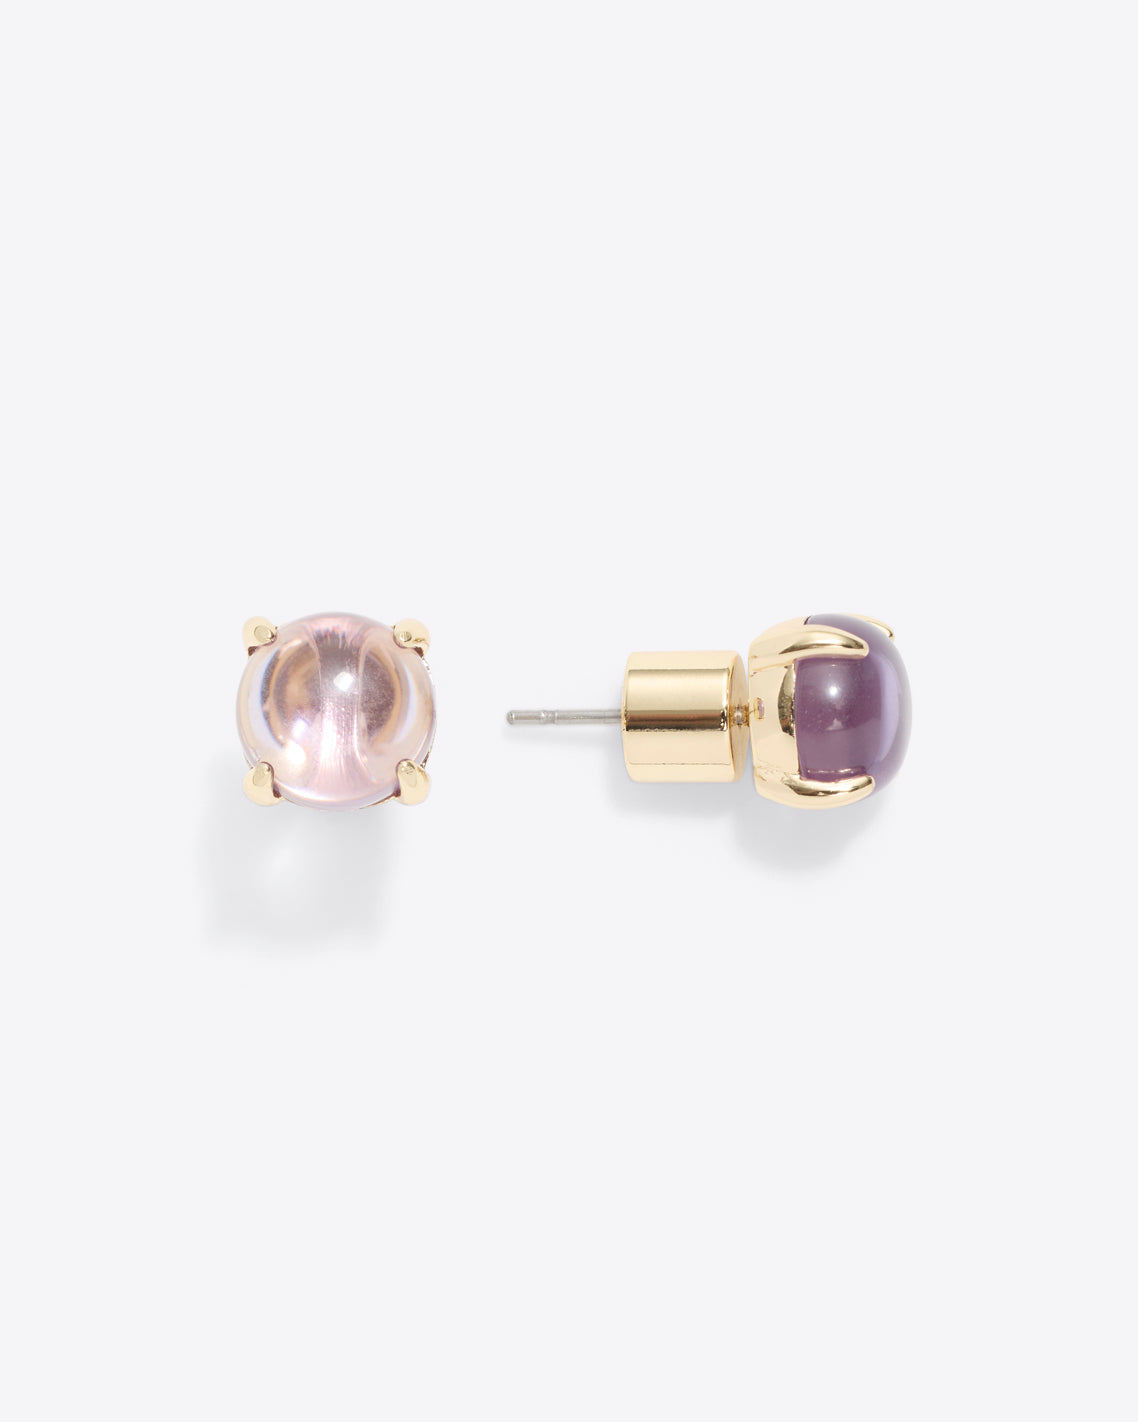 Jelly Cabochon Studs in Lavender